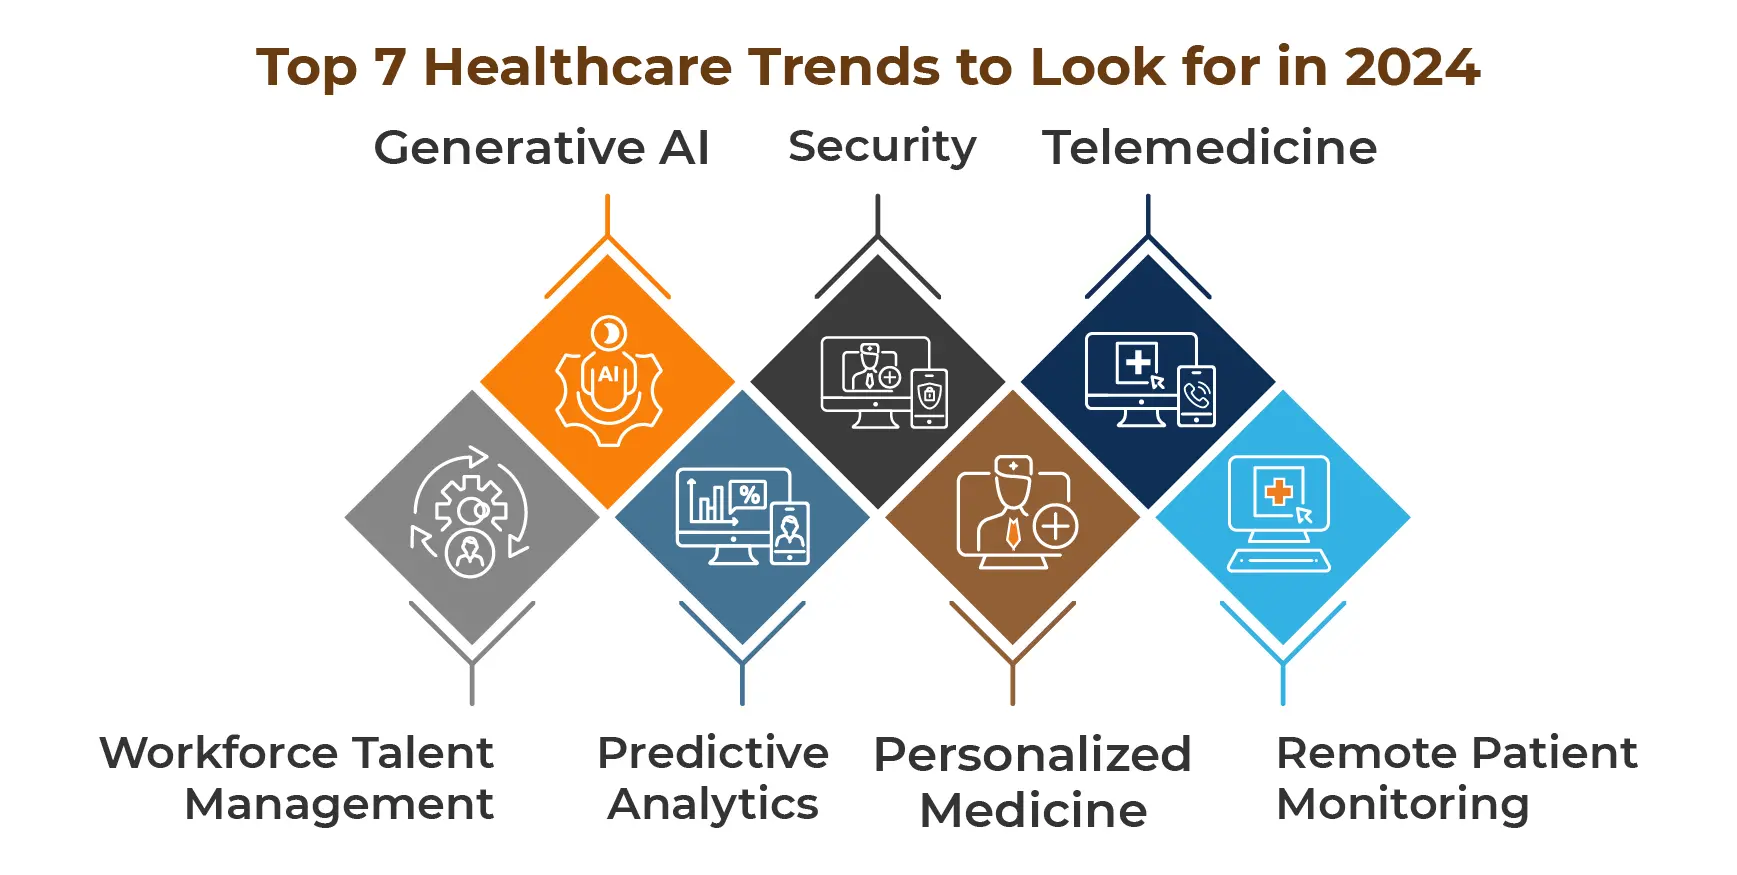 Top 7 Healthcare Trends to Look for in 2024